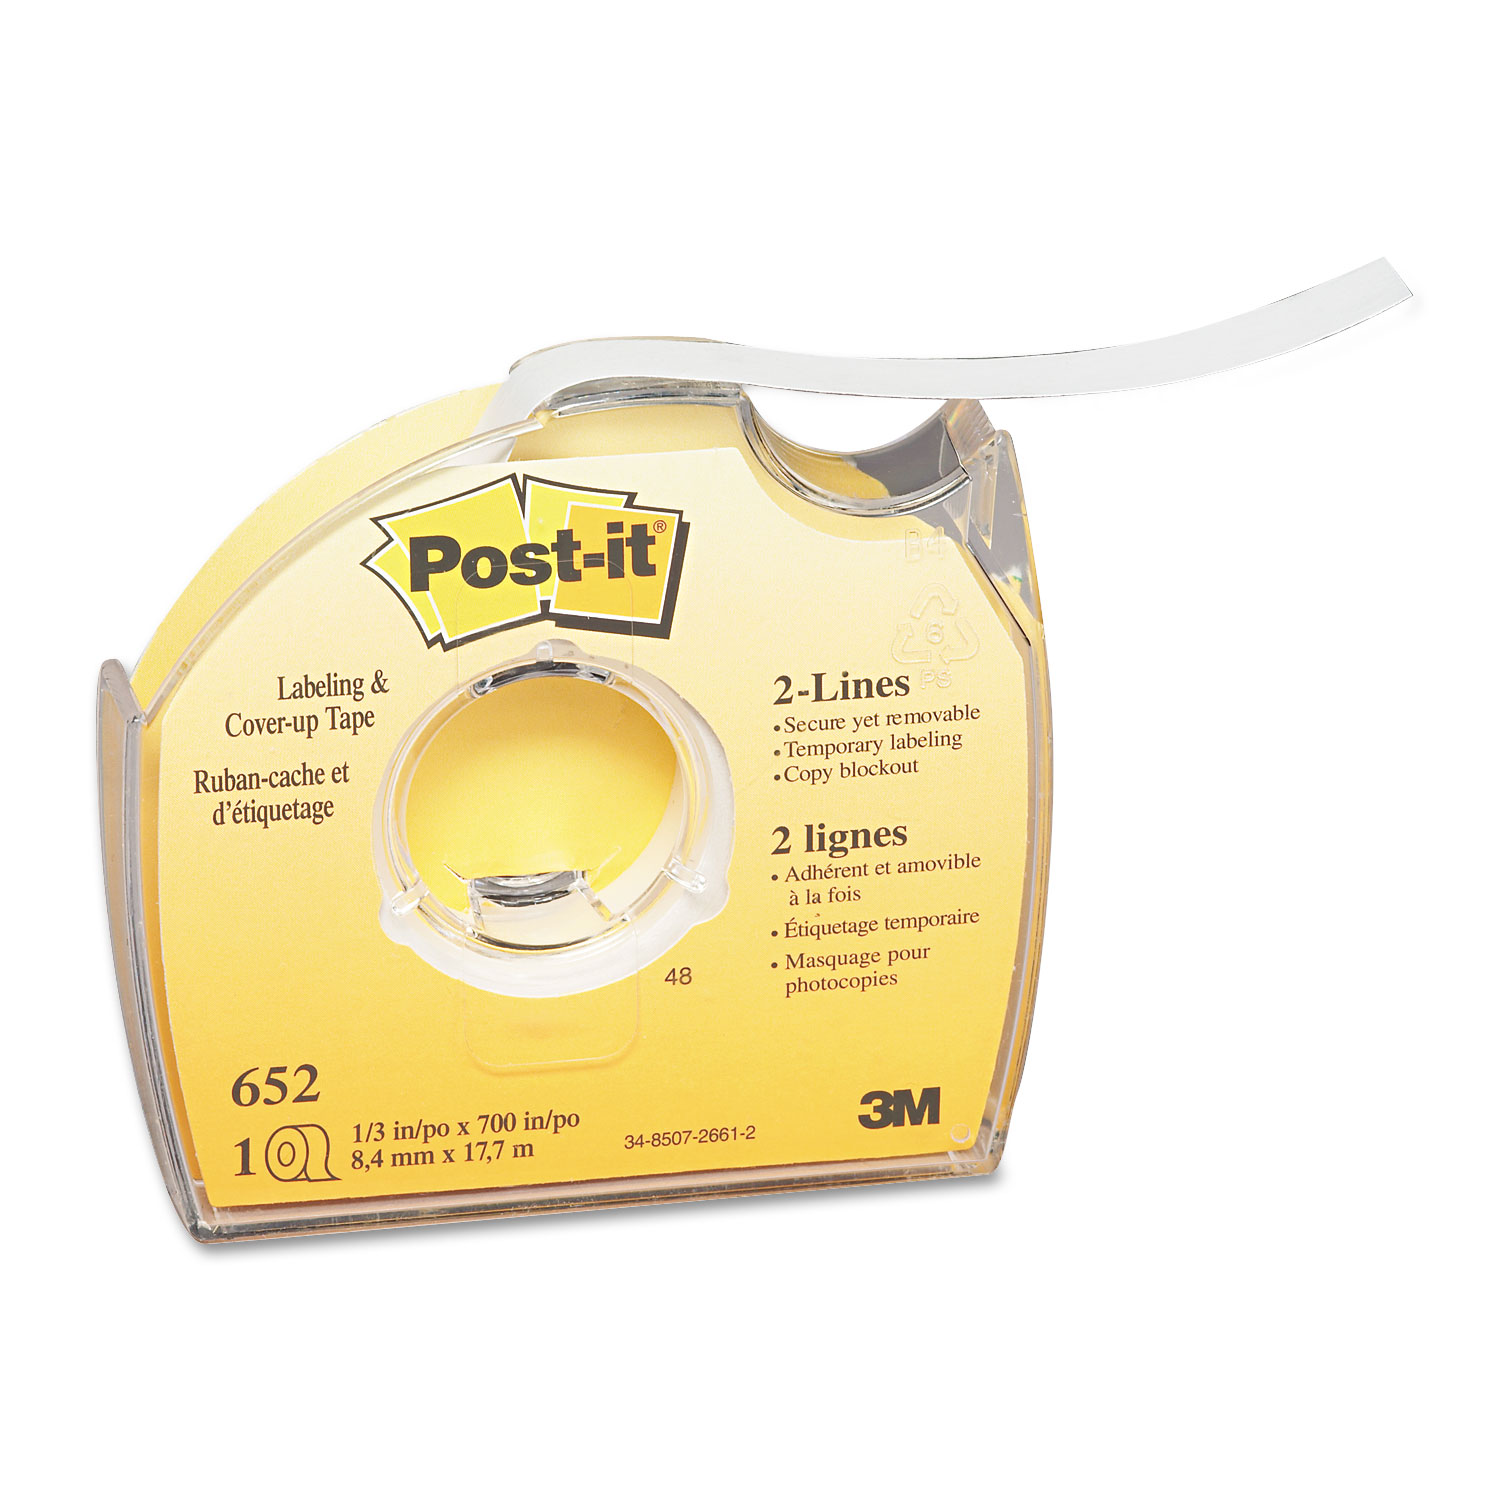  Post-it 652 Labeling & Cover-Up Tape, Non-Refillable, 1/3 x 700 Roll (MMM652) 